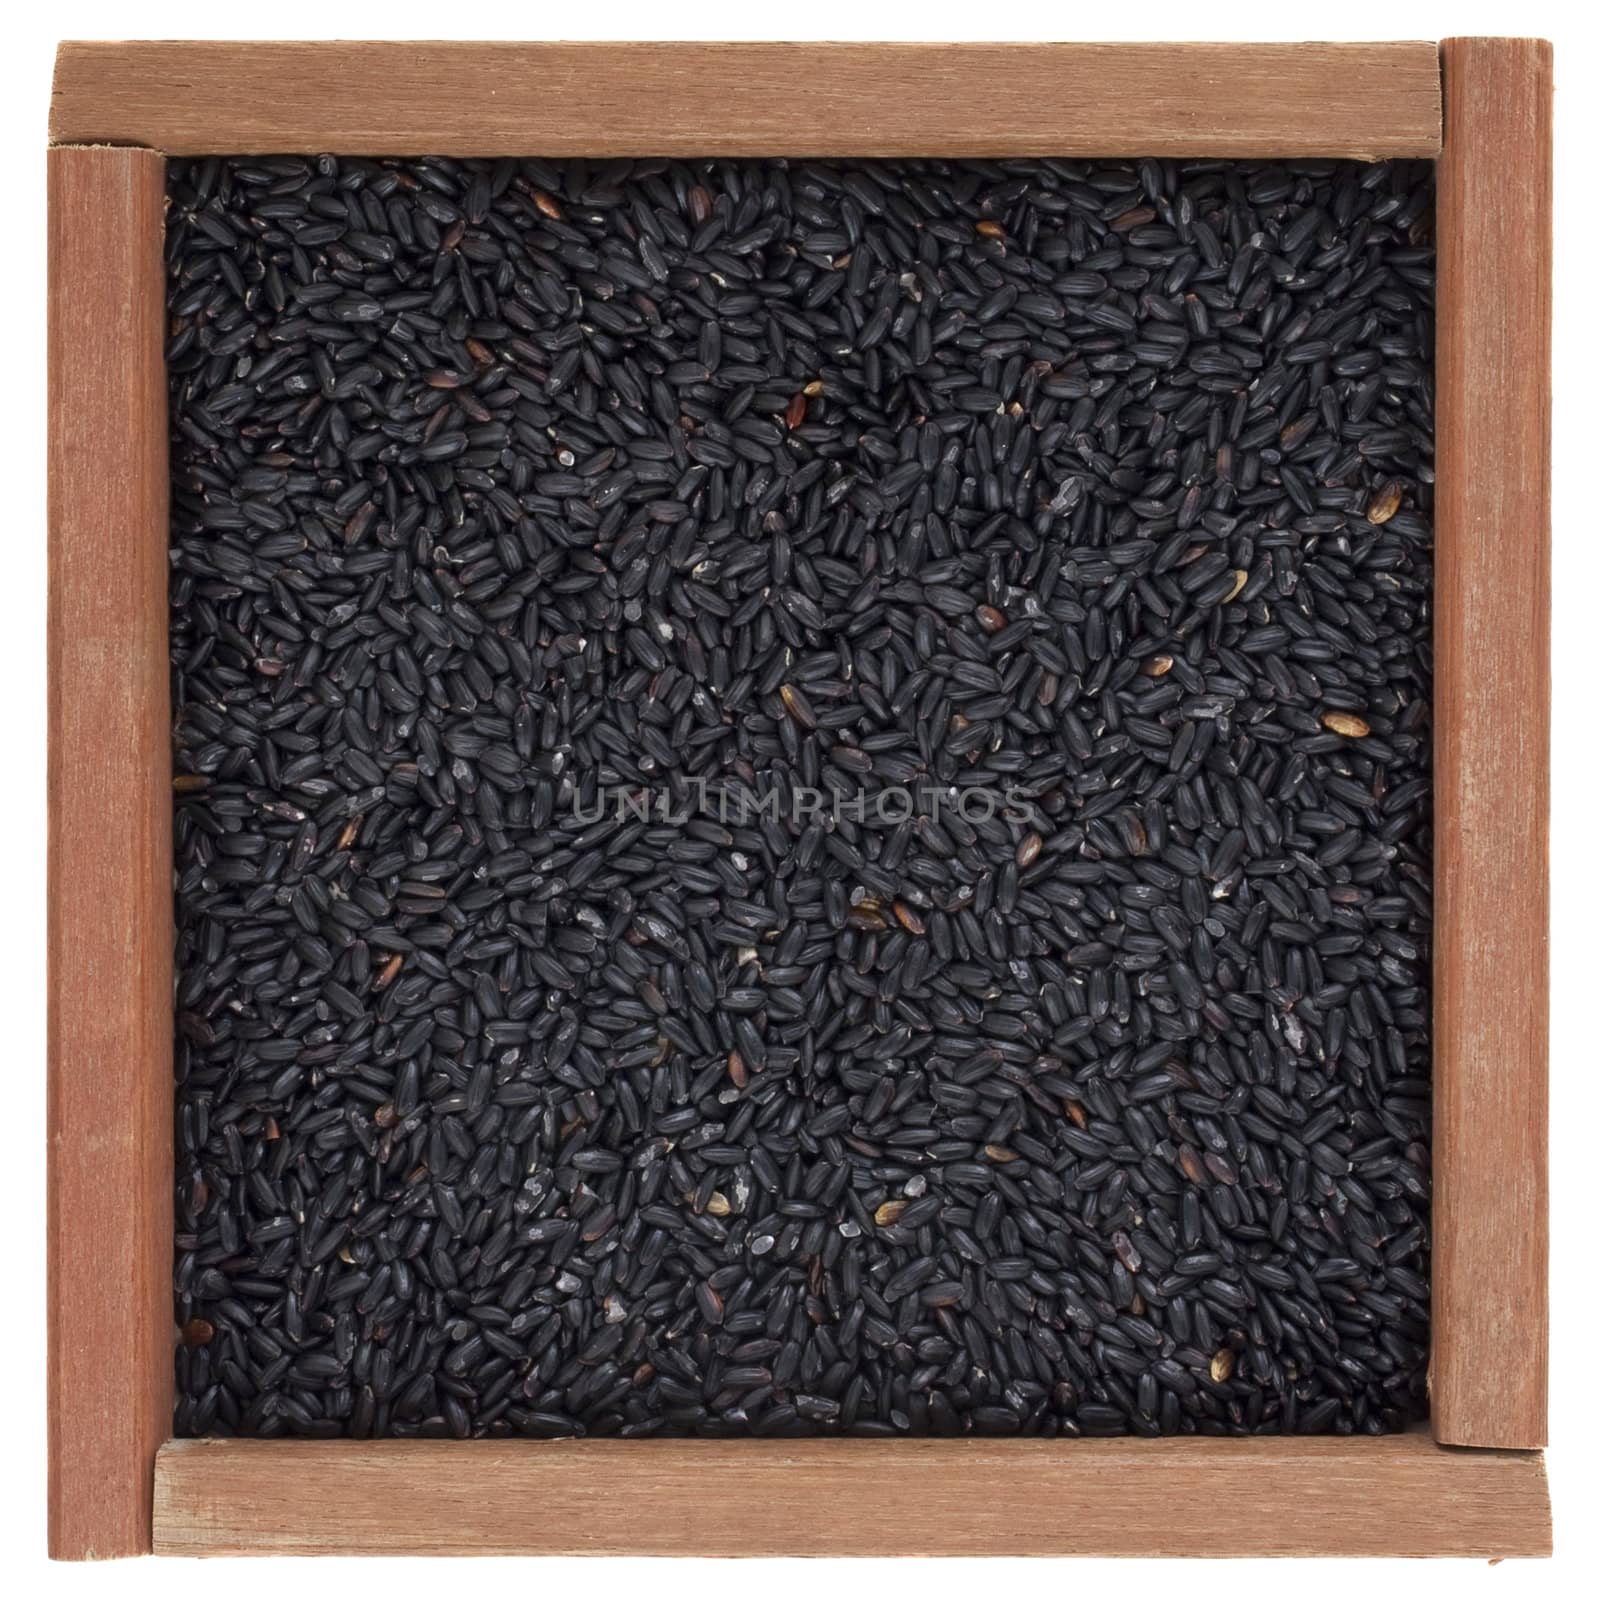 Chinese black forbidden rice in a square wooden box or frame, isolated on white